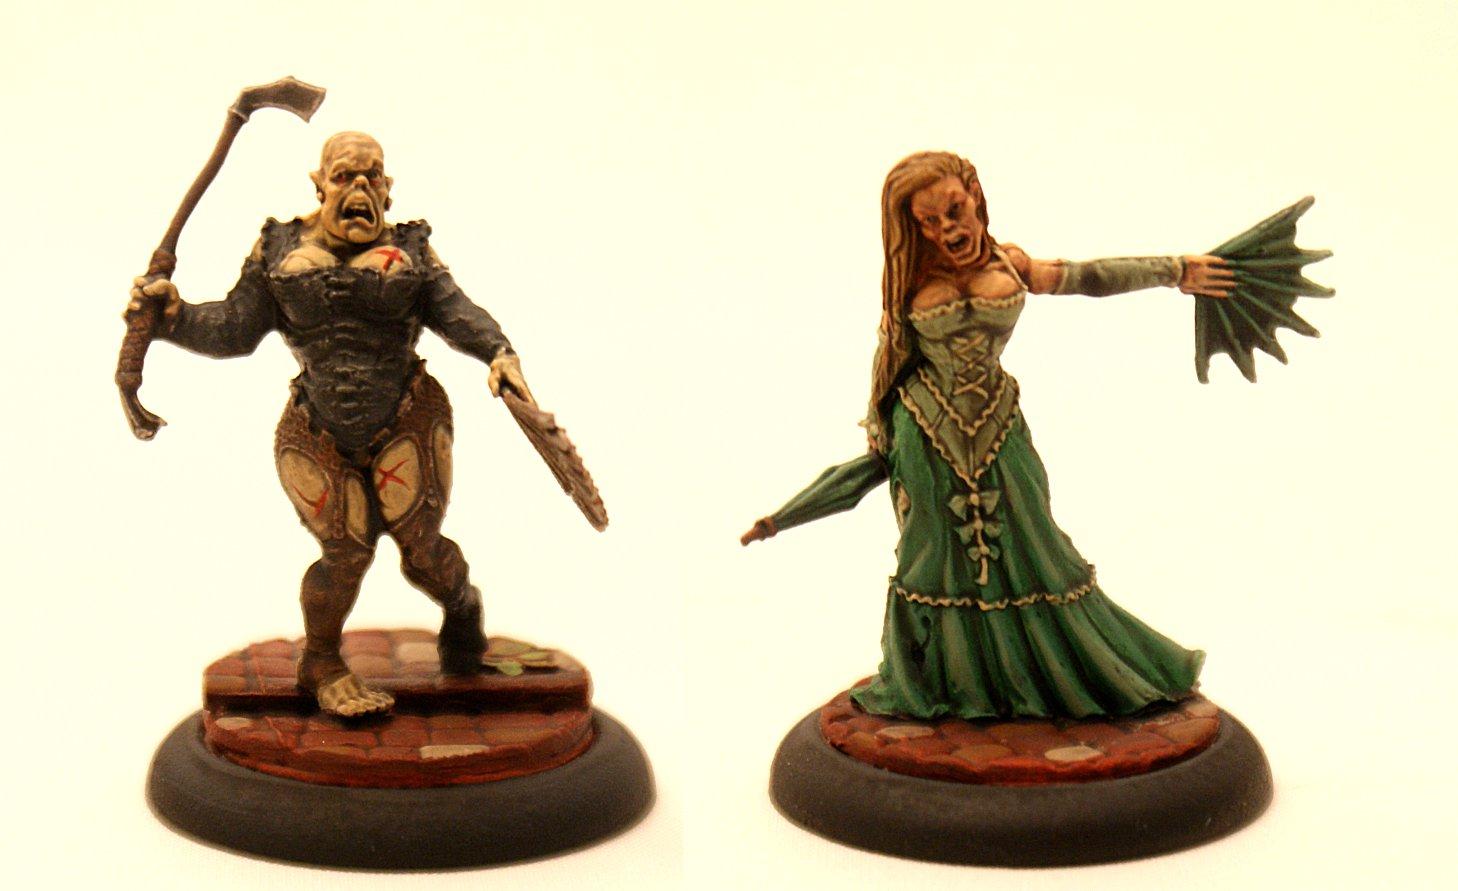 Hatter, Mad, Malifaux, Miniatures, Ressurrectionists, Seamus, Undead, Whores, Wyrd, Zombie